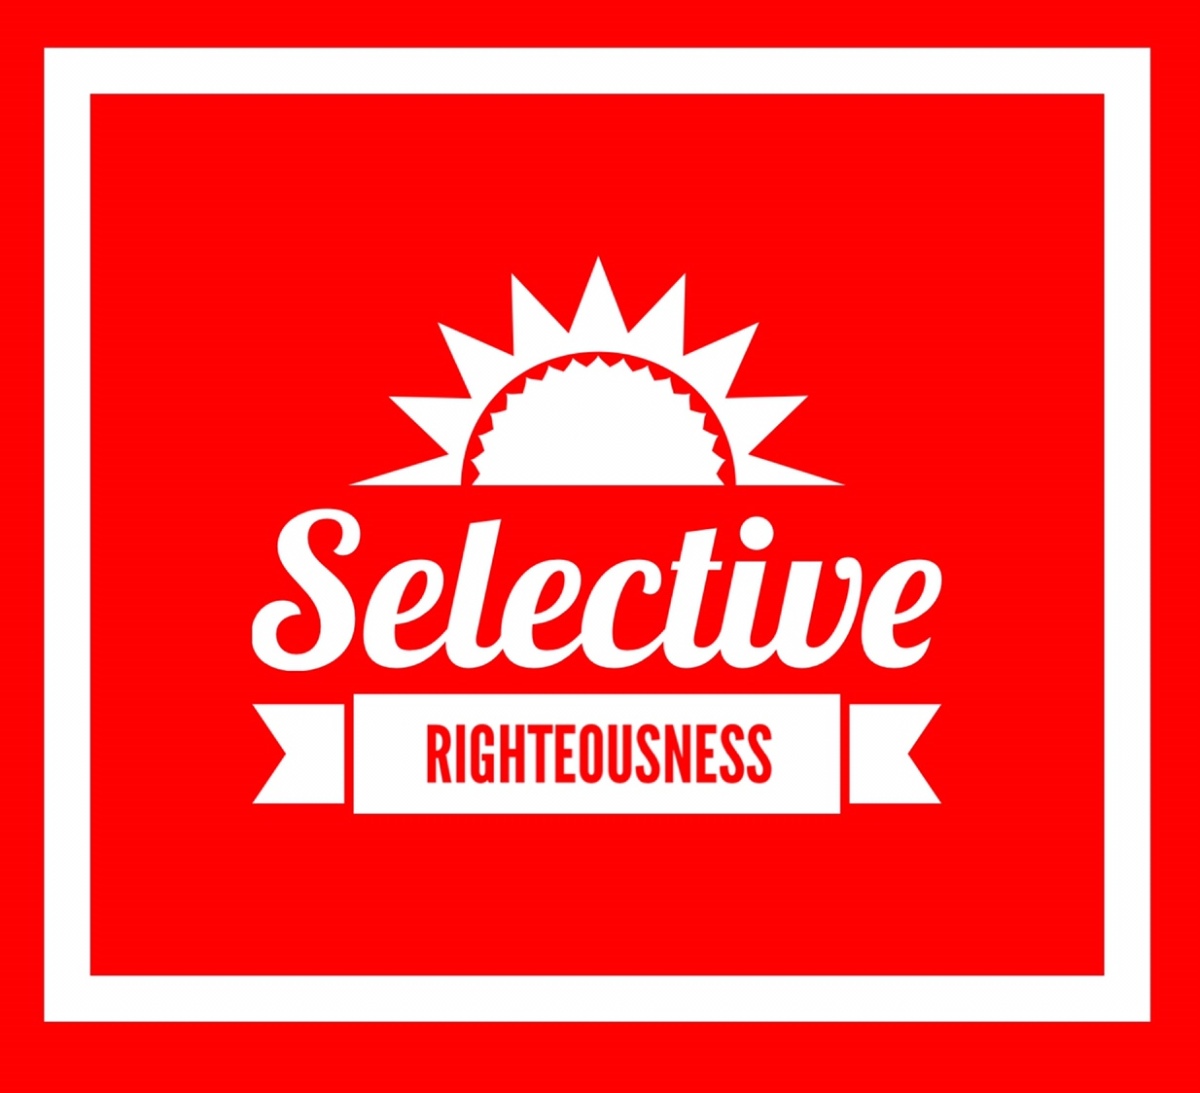 Selective Righteousness